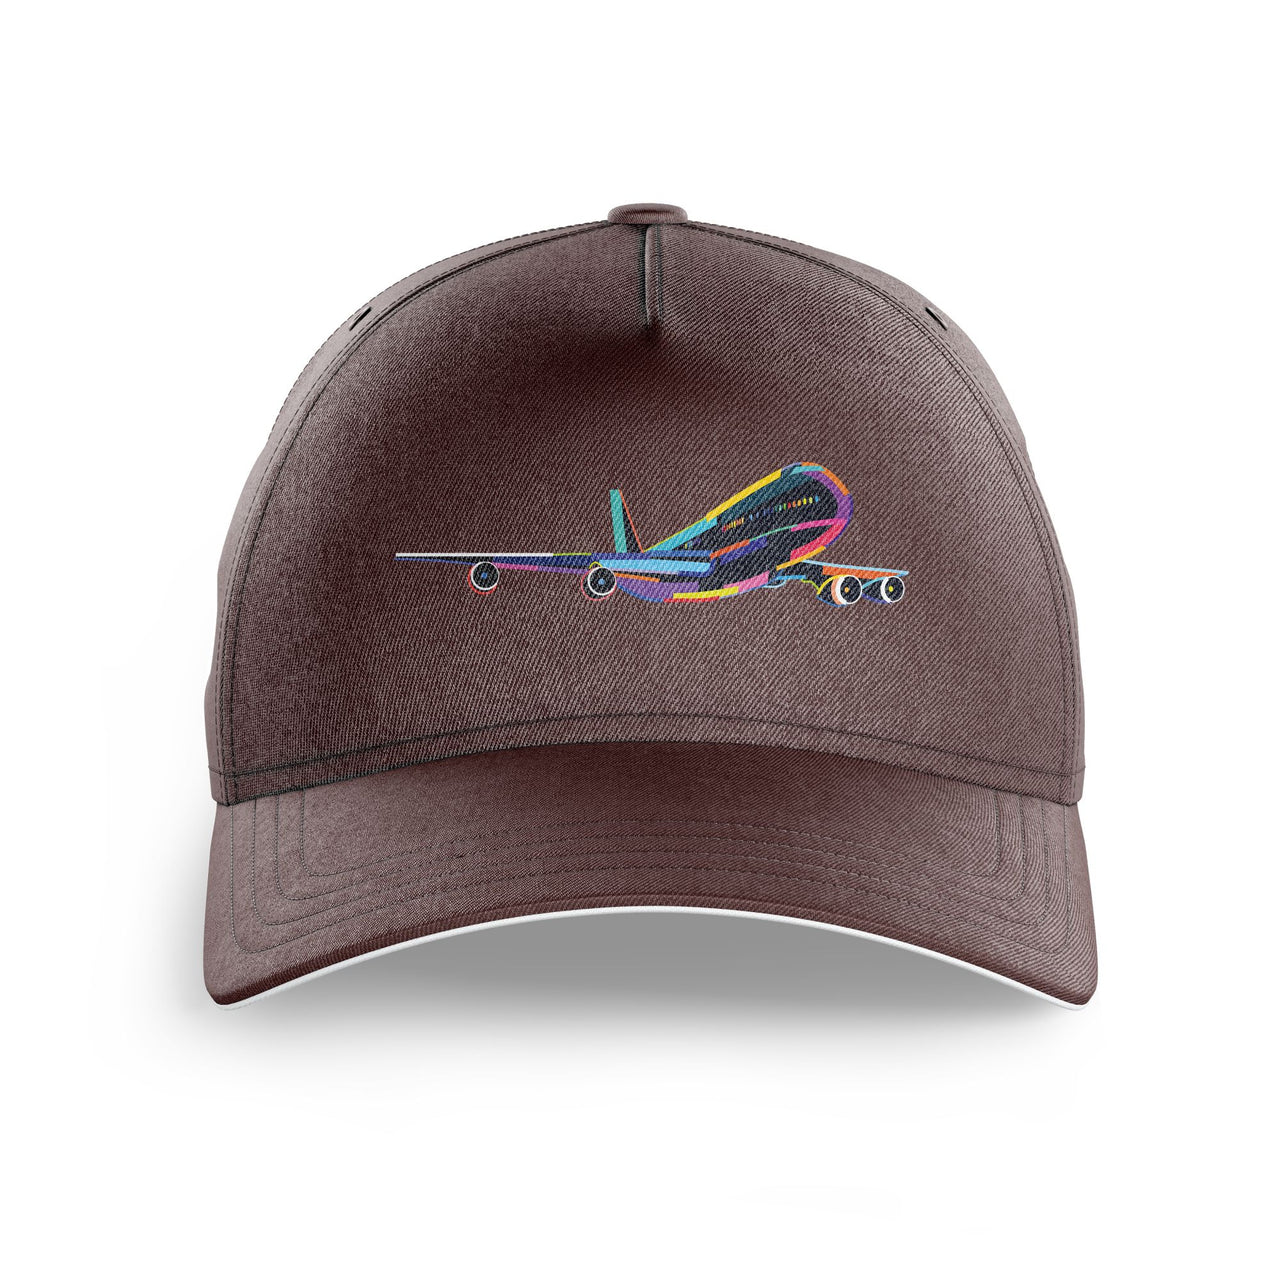 Multicolor Airplane Printed Hats